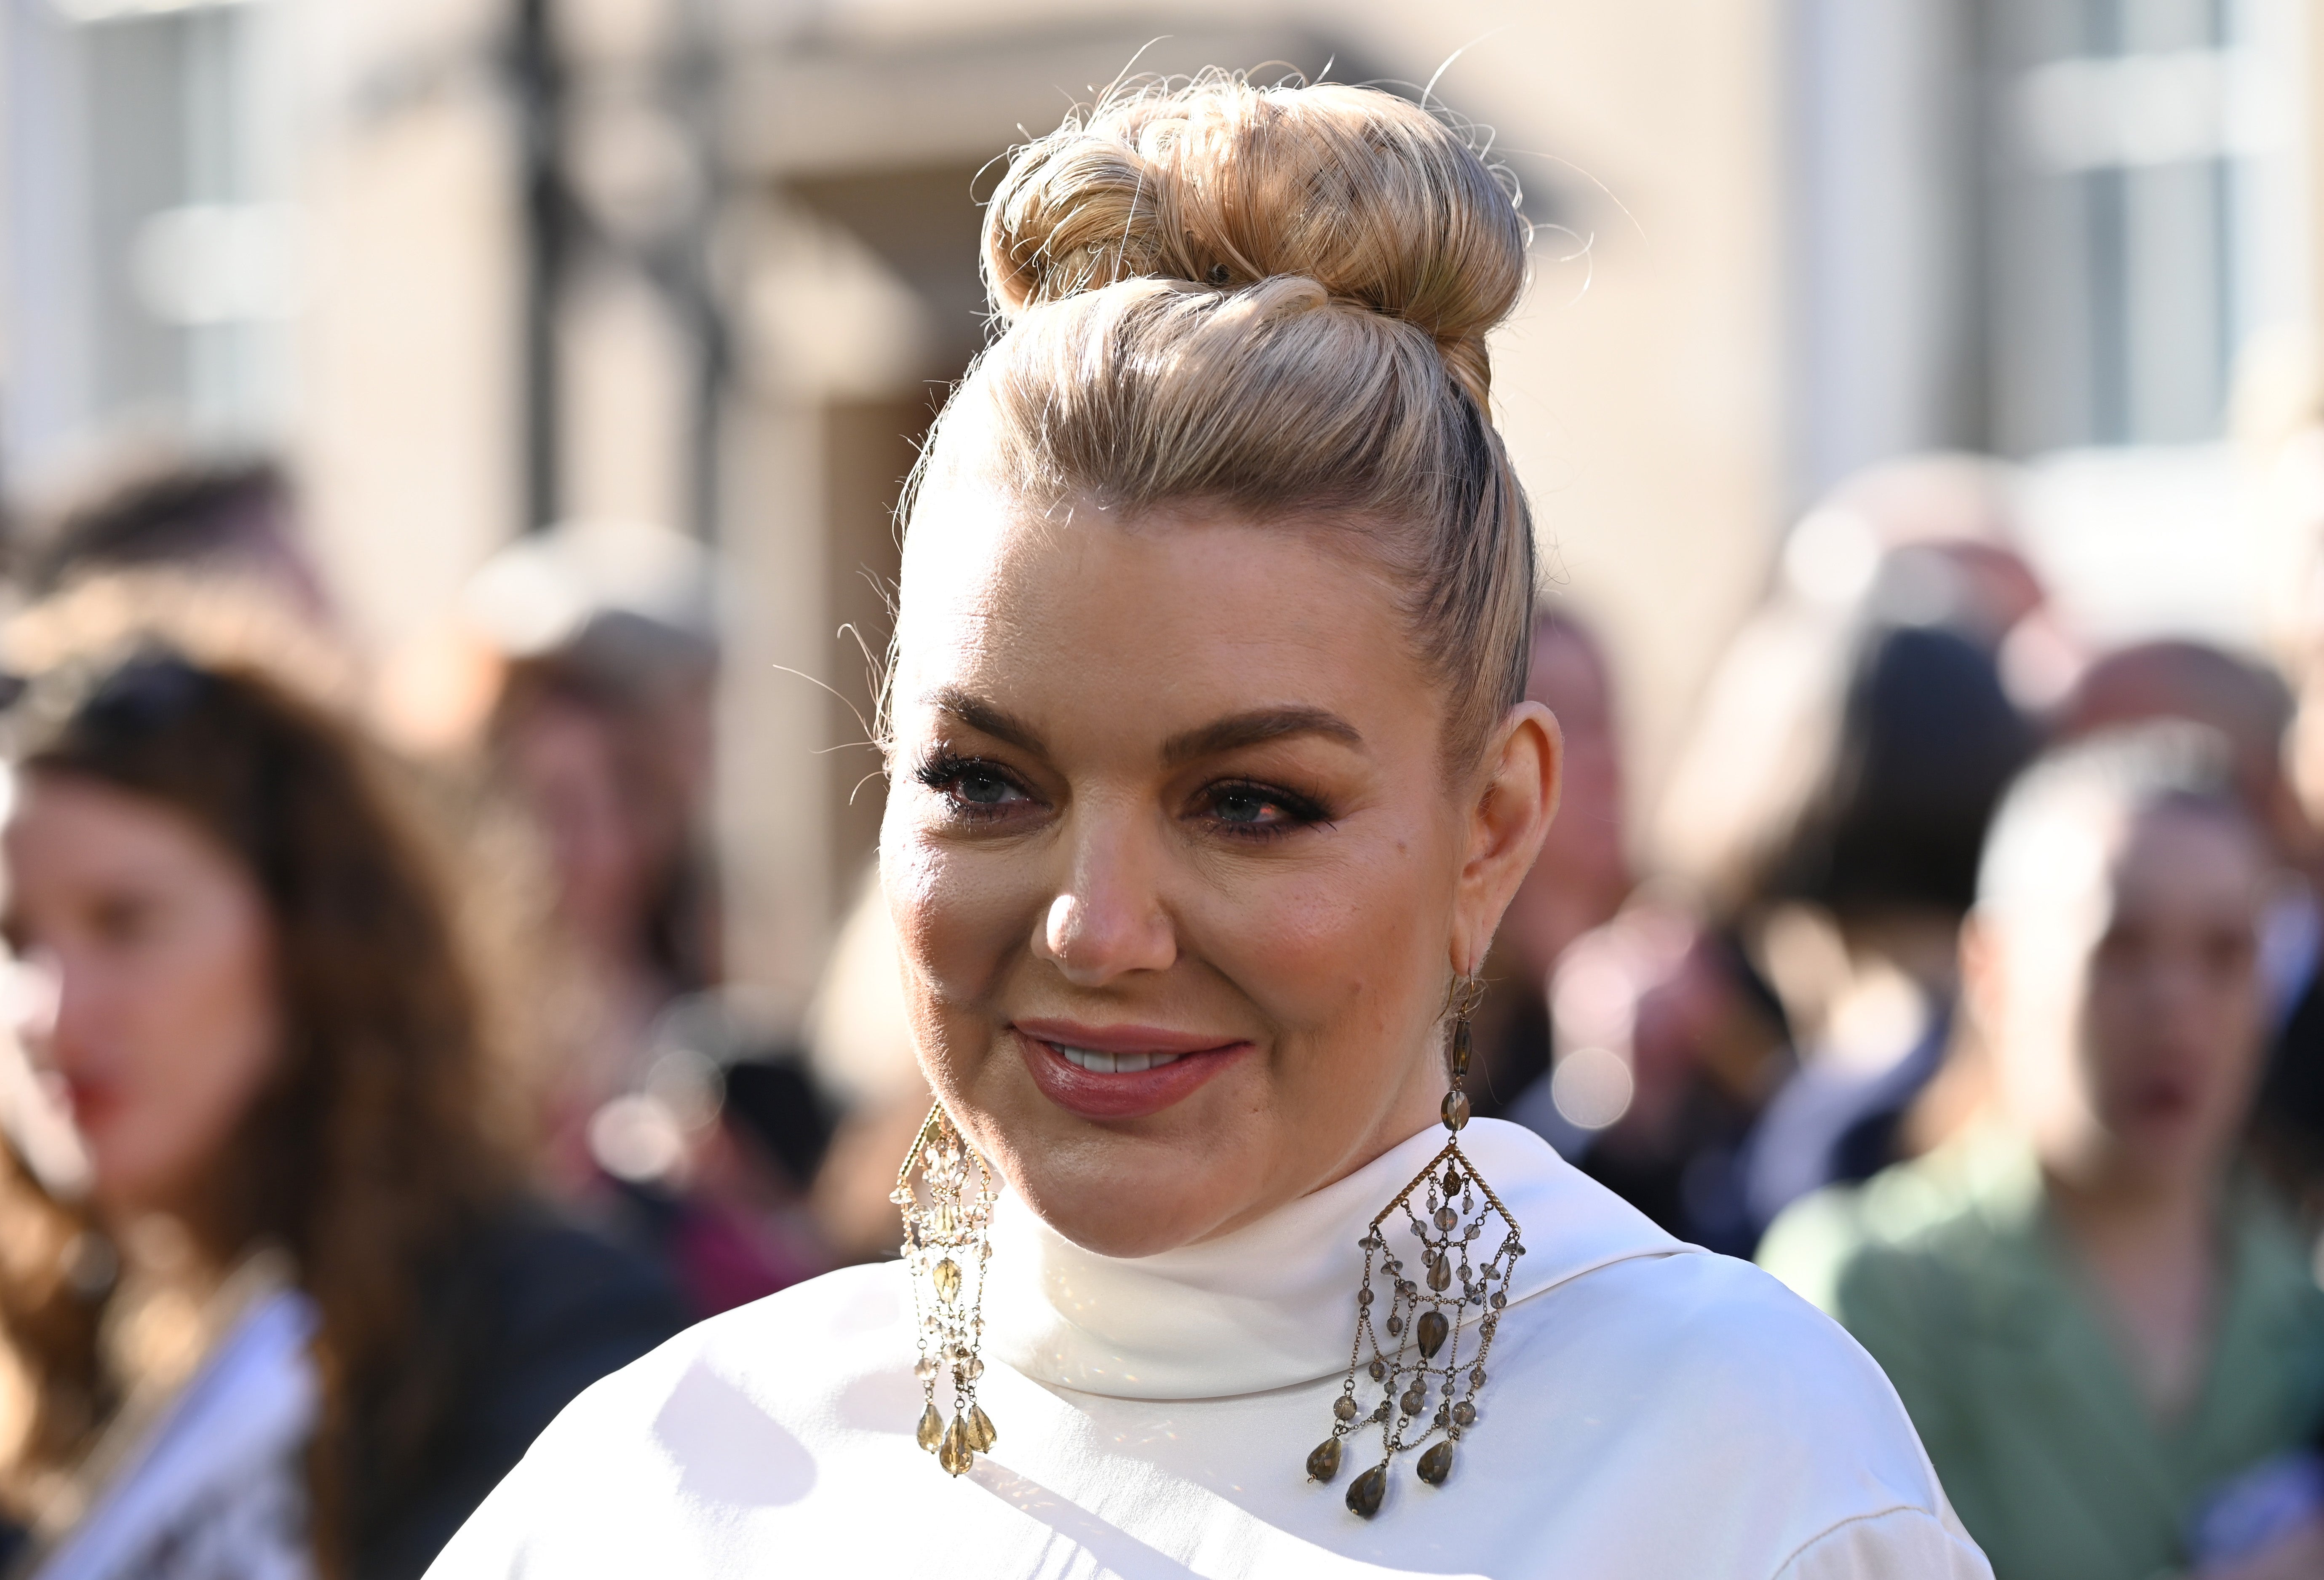 The 42-year-old actor Sheridan Smith revealed she has recently been diagnosed with ADHD